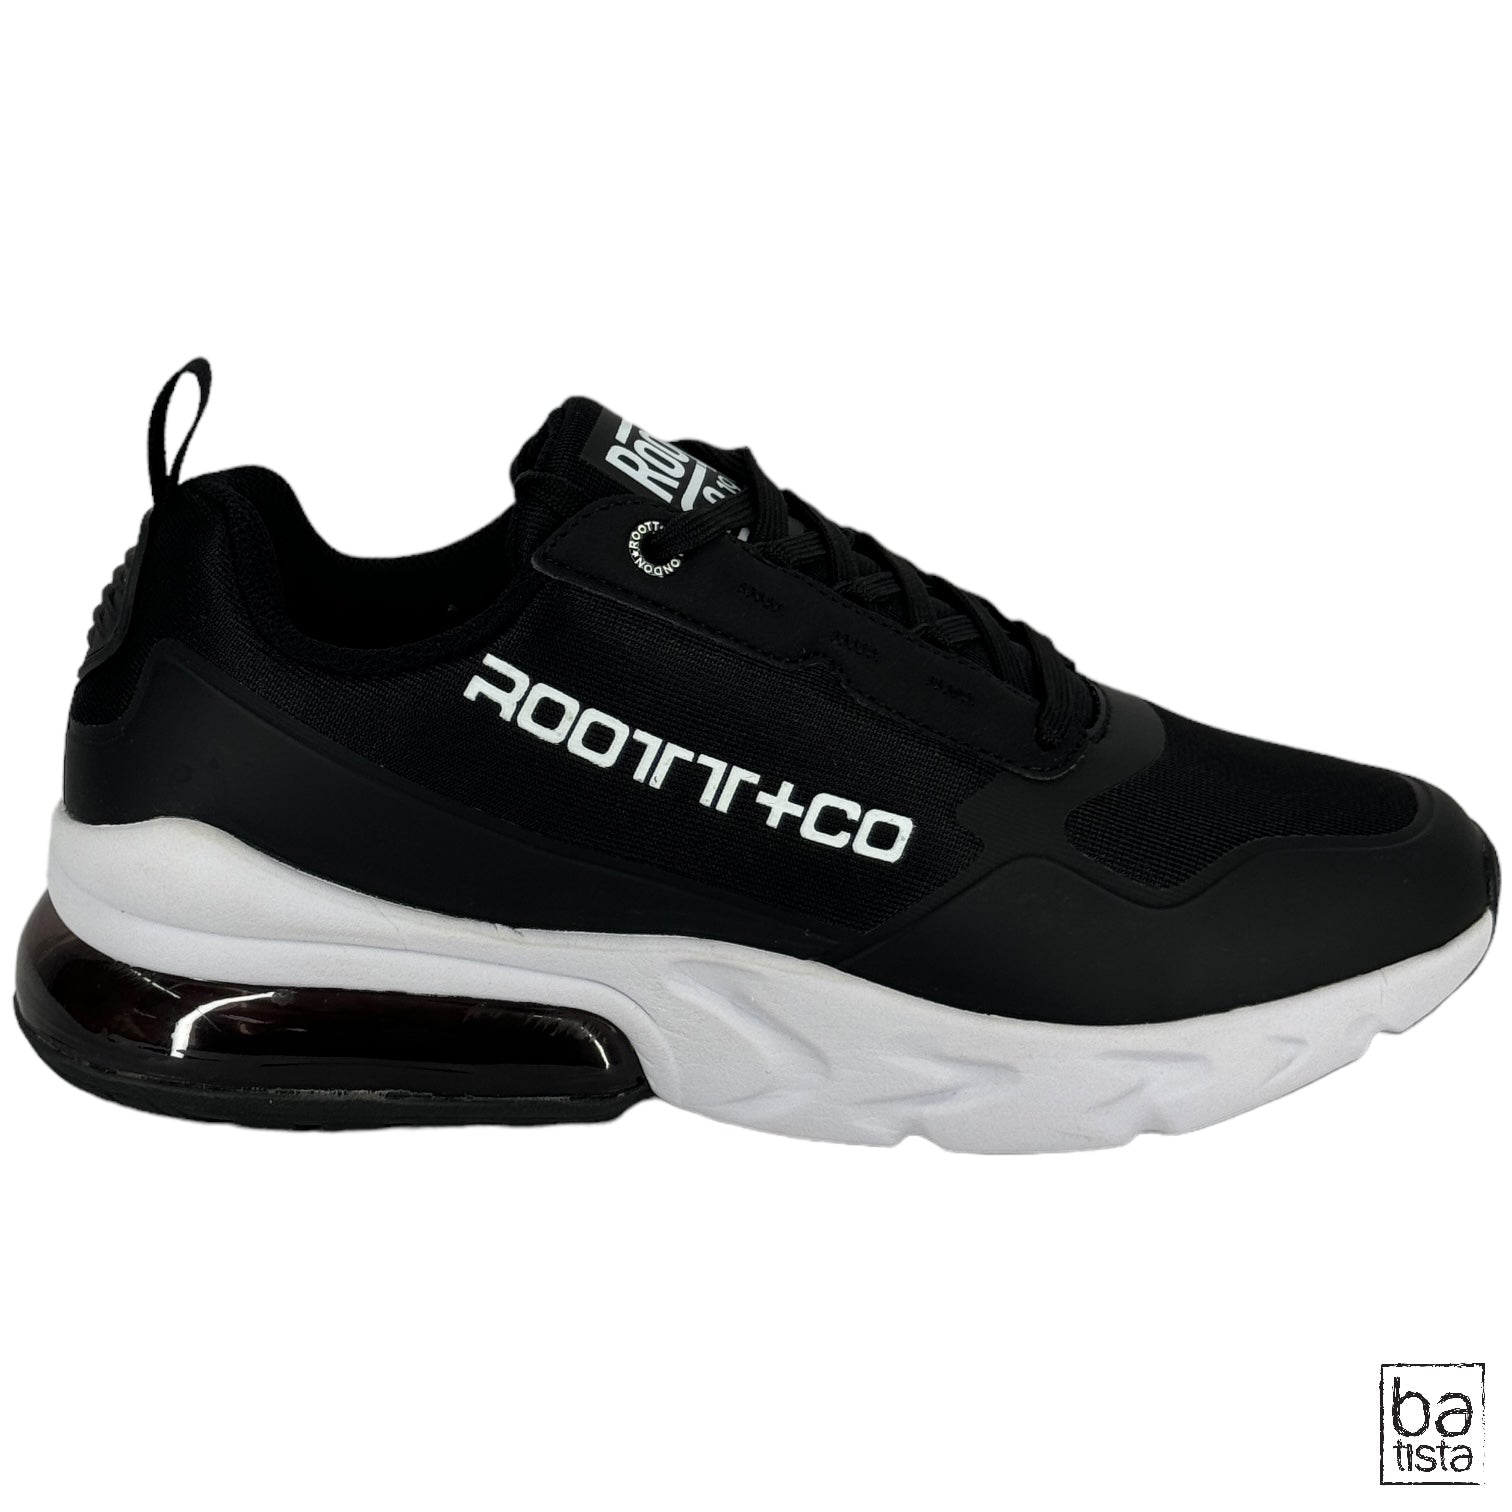 Zapatos Roott + Co 89022